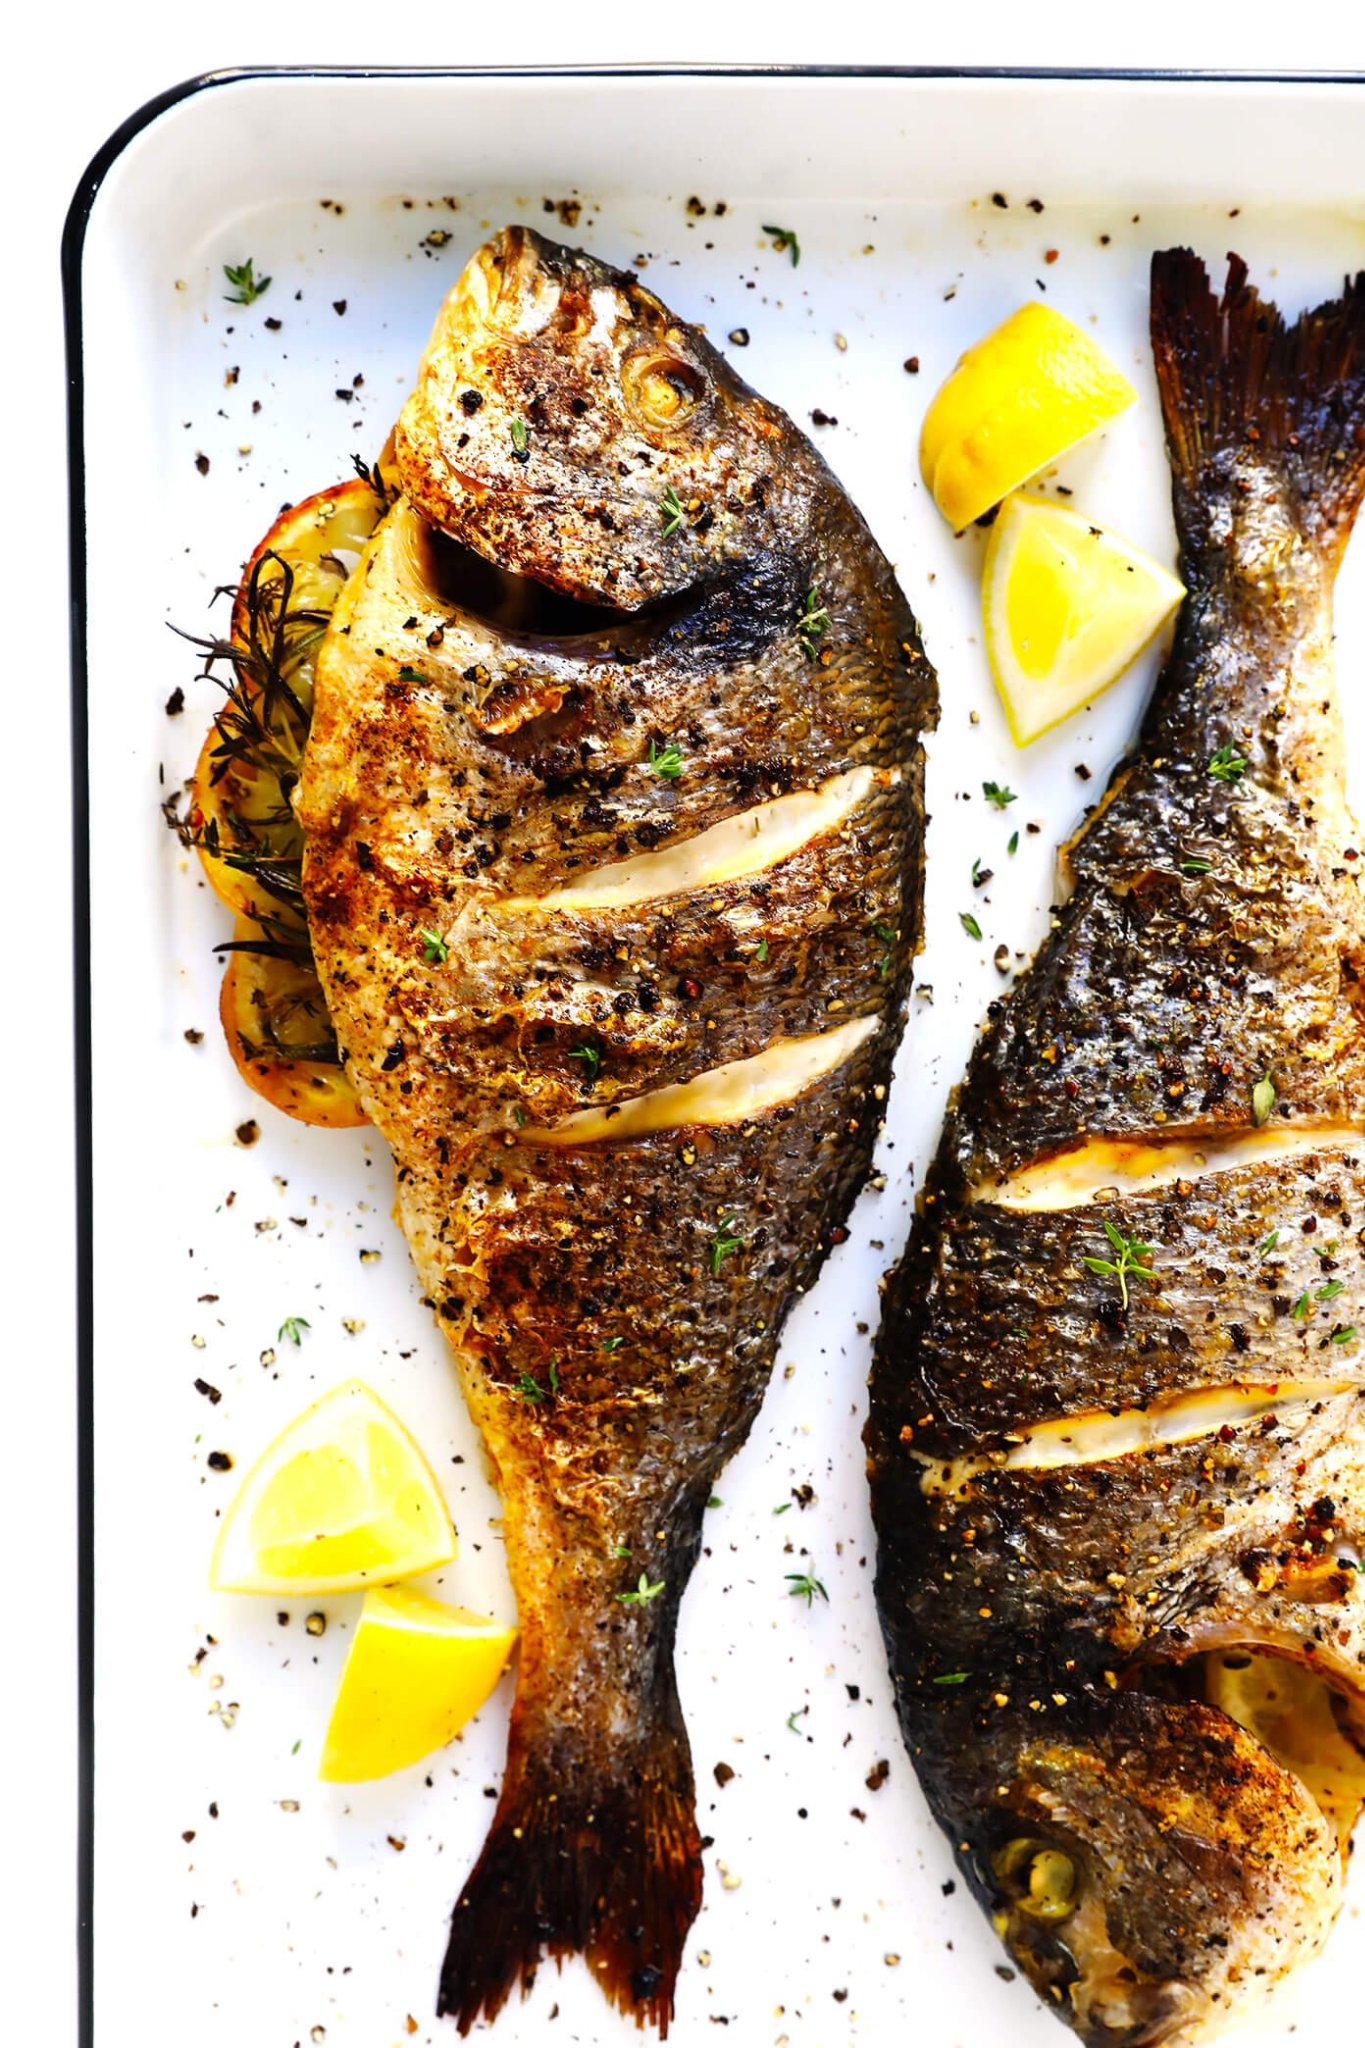 How To Cook A Whole Fish